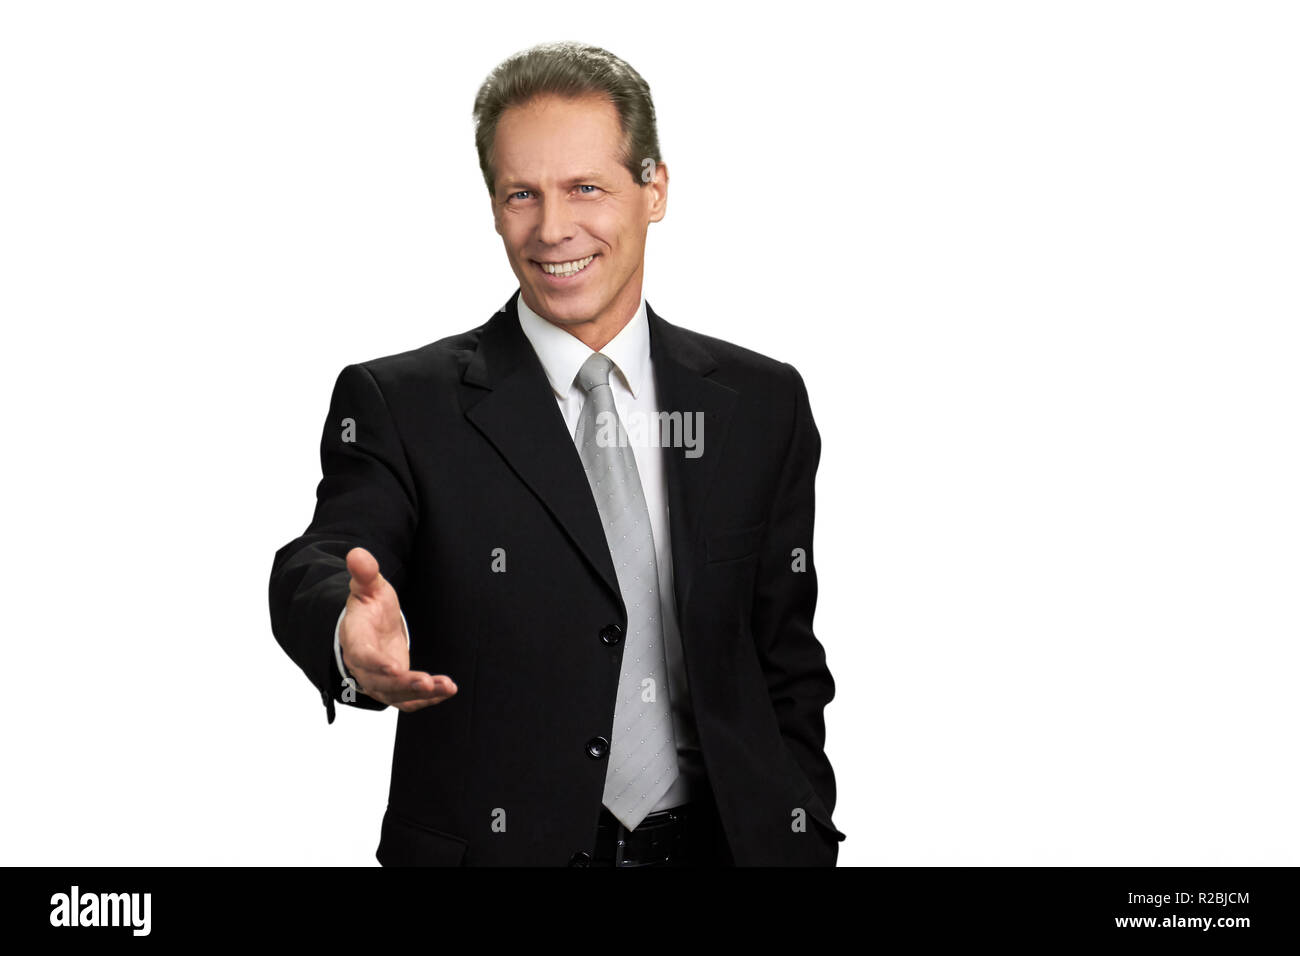 Businessman outstretched hand for greeting. Portrait of businessman extending hand for handshake, isolated on white background. Stock Photo